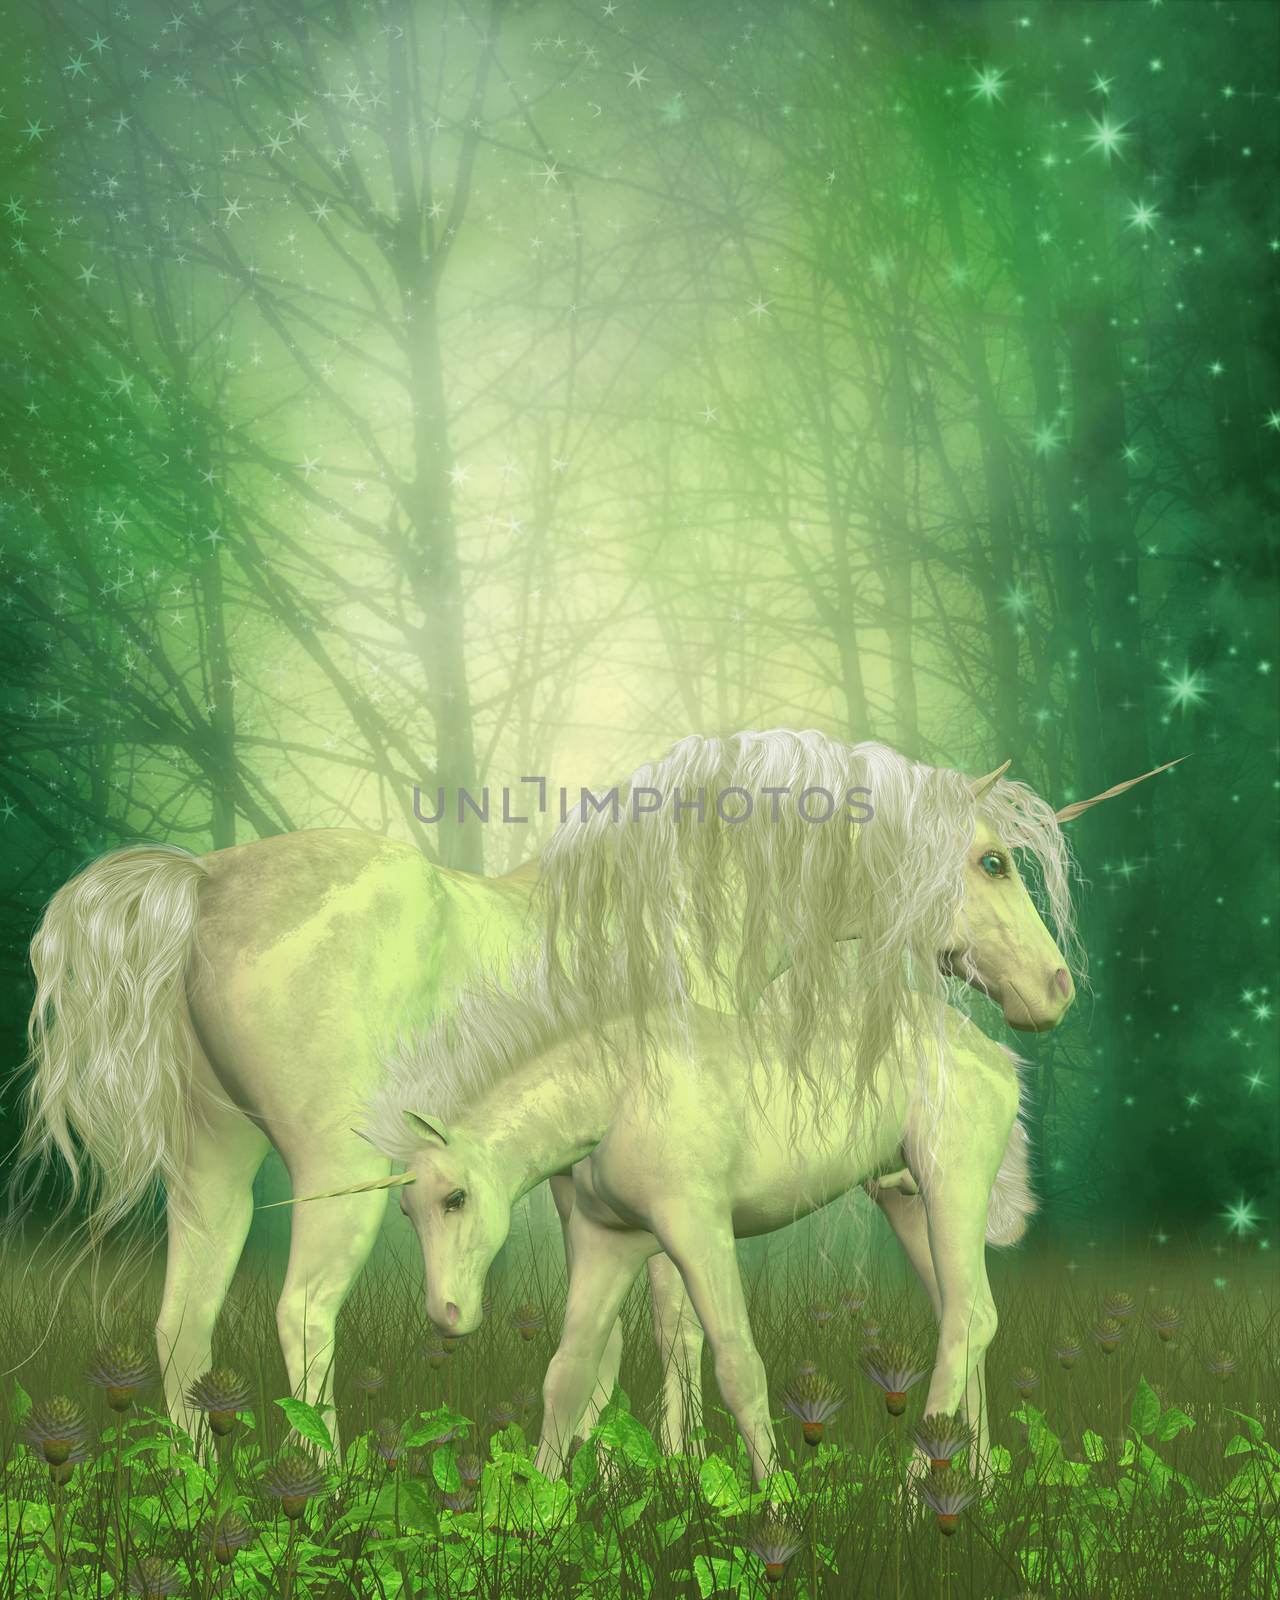 A small unicorn colt investigates the forest vegetation as his mother stands protectively over him.